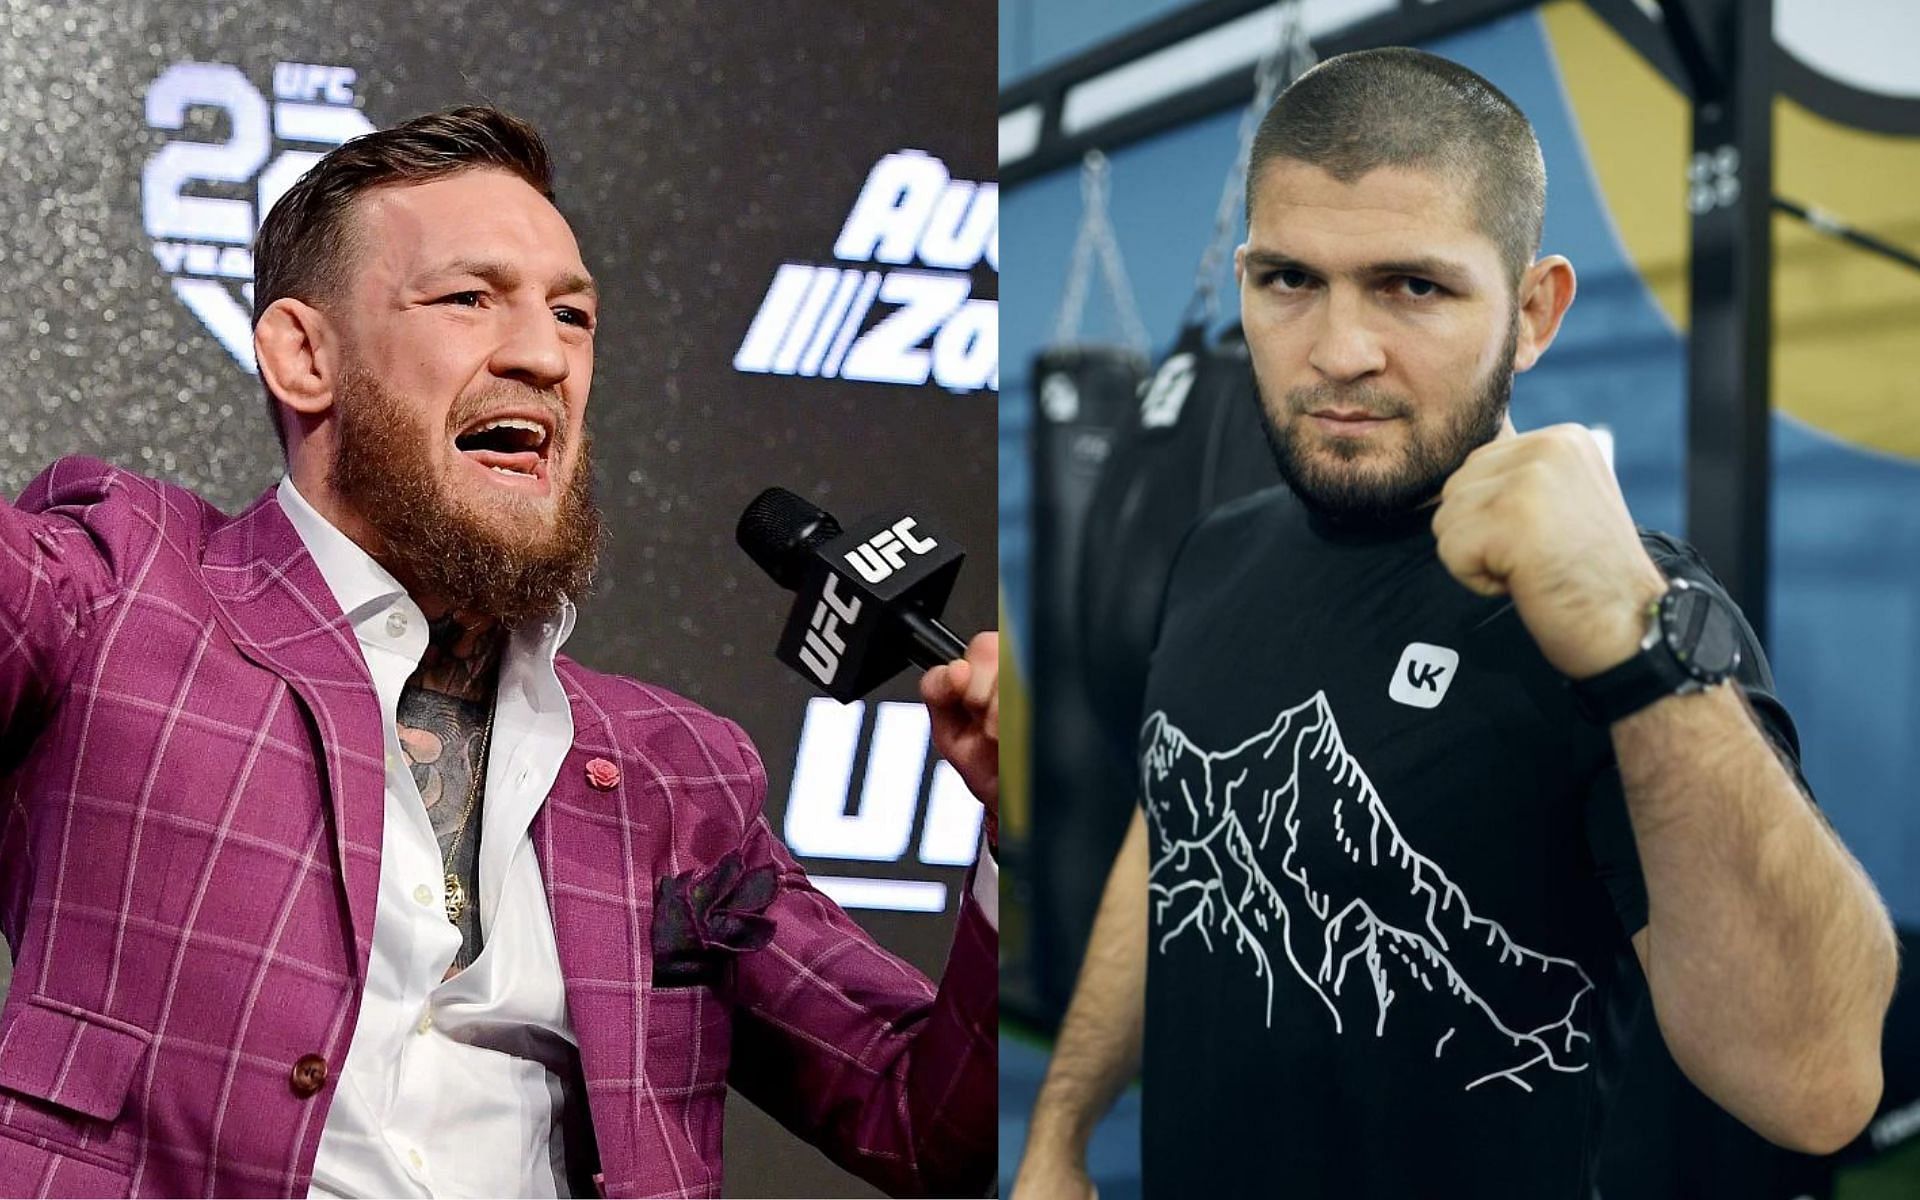 Conor McGregor (left) blasts Khabib Nurmagomedov (right) over legal troubles reportedly stopping him from going to Russia [Images courtesy: Getty Images and @khabib_nurmagomedov on Instagram]